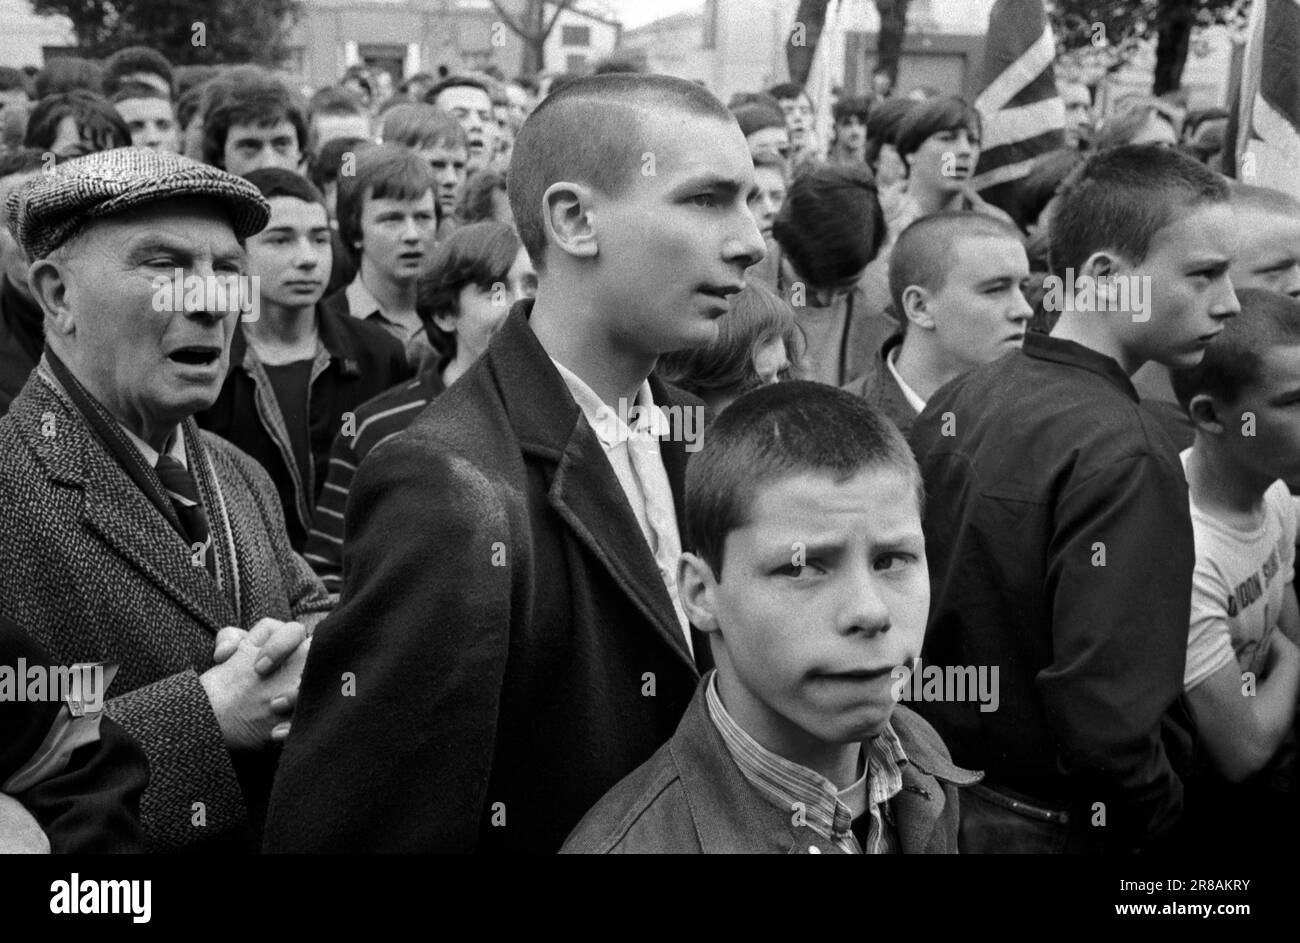 Skinheads style, the hairstyle was designed they though as if to look tough. They are at a National Front, 'Defend Our Old Folk Repatriate Muggers' rally and march through Southwark. Southwark, South London England circa 1980. 1980s UK HOMER SYKES Stock Photo